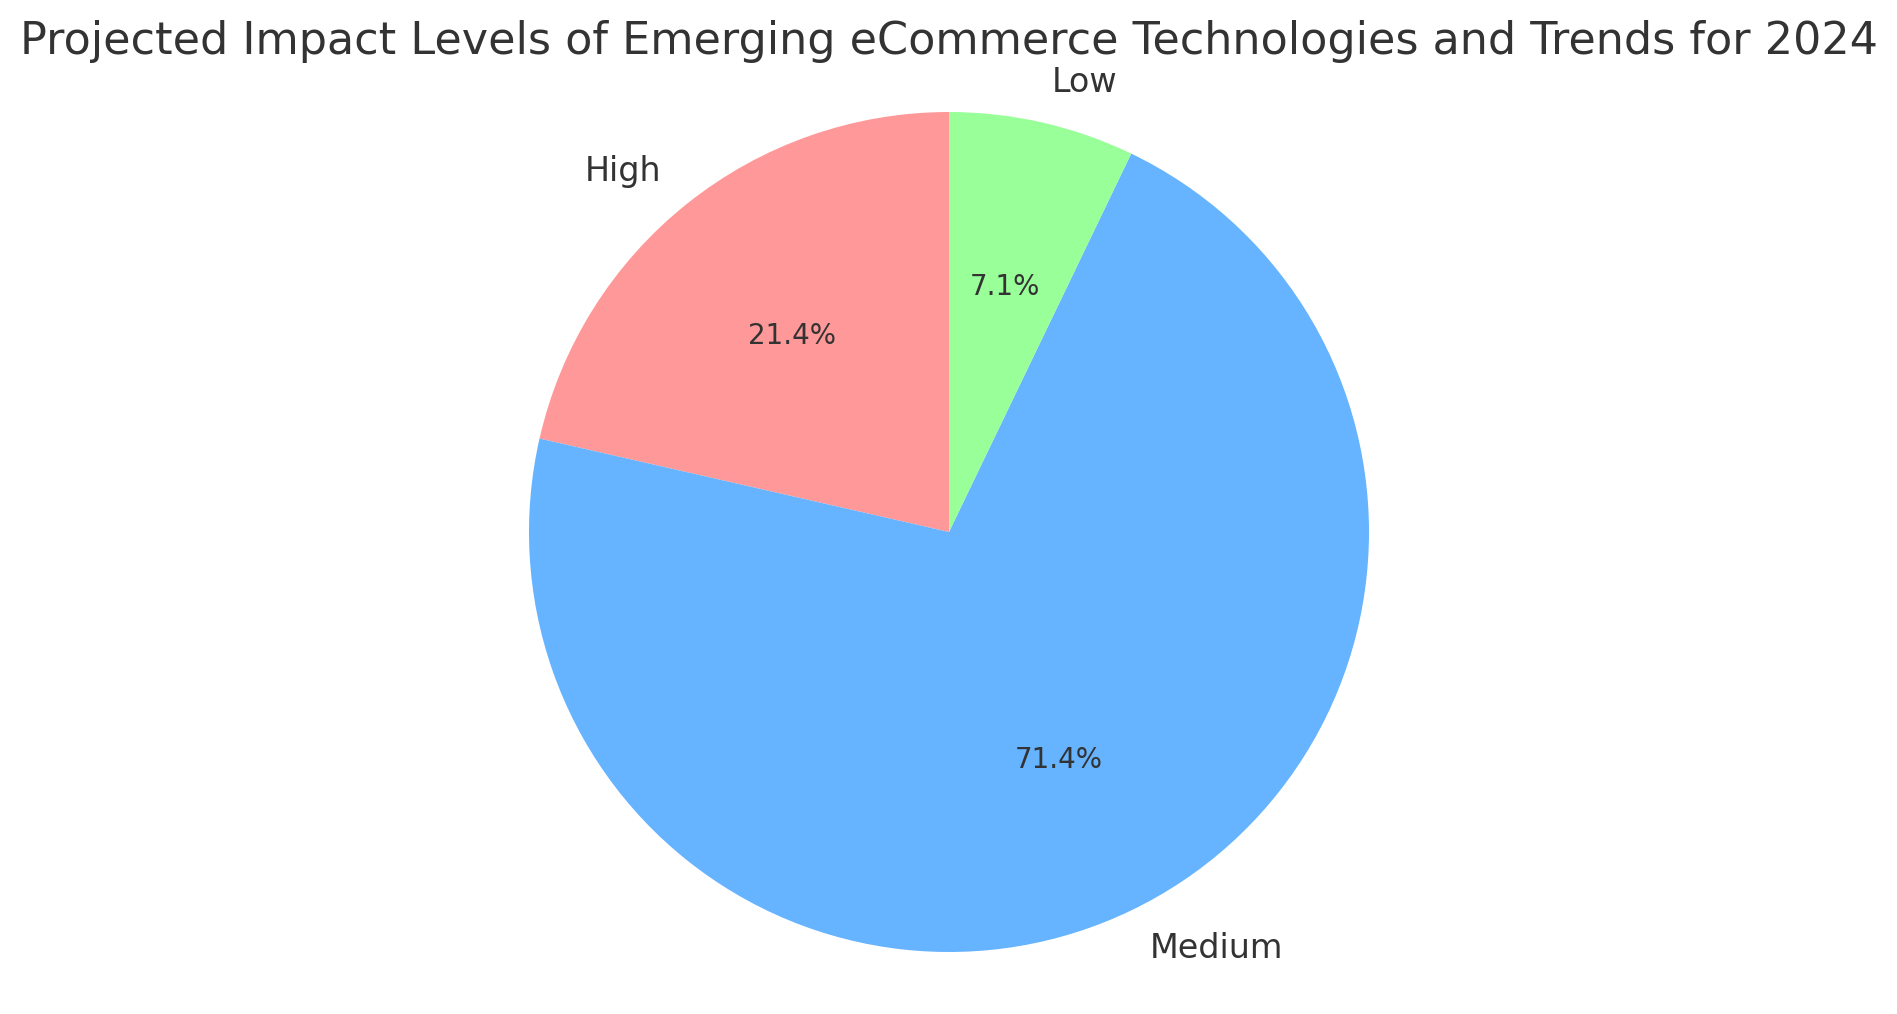 Consumer Interest Levels in eCommerce Technologies